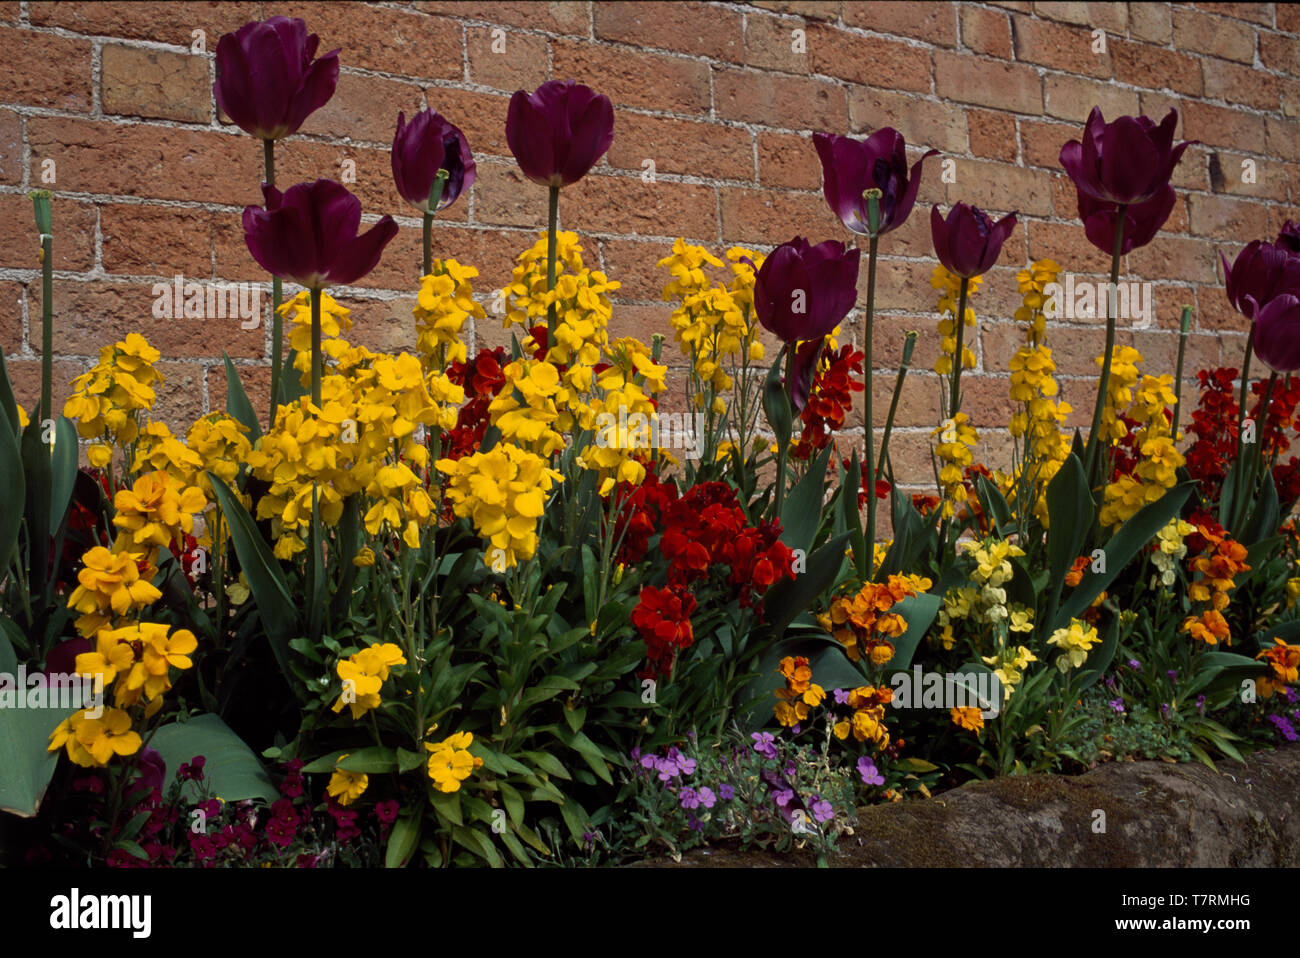 Yellow and red wallflowers with purple tulips Stock Photo